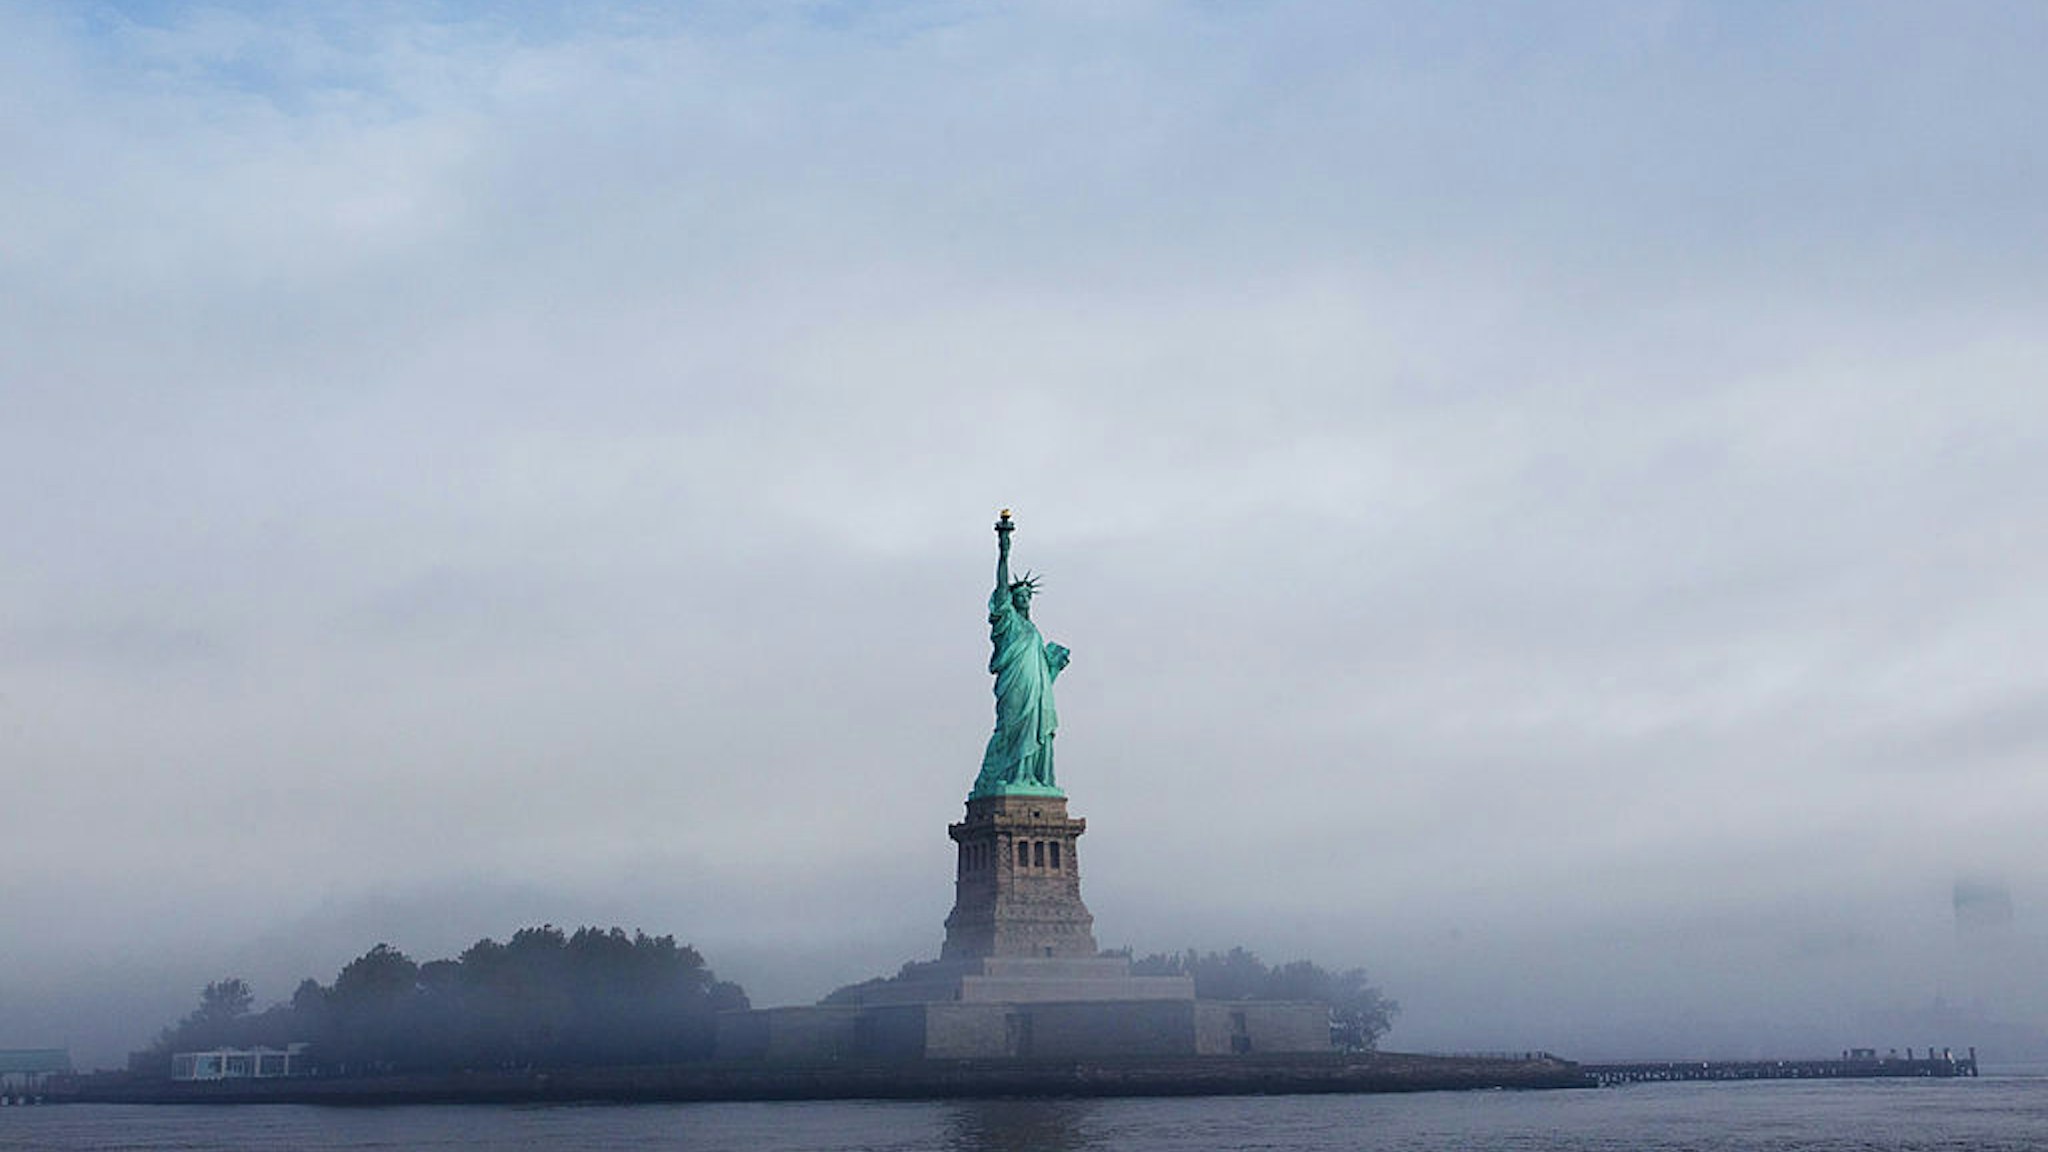 NEW YORK CITY- SEPTEMBER 22: The Statue of Liberty is seen through fog prior to the start of the 125th Anniversary of the Statue of Liberty ceremony on Liberty Island on September 22, 2011 in New York City. The 125th Anniversary of the Statue of Liberty is to be celebrated on October 28th, 2011. (Photo by Daniel Berehulak/Getty Images)